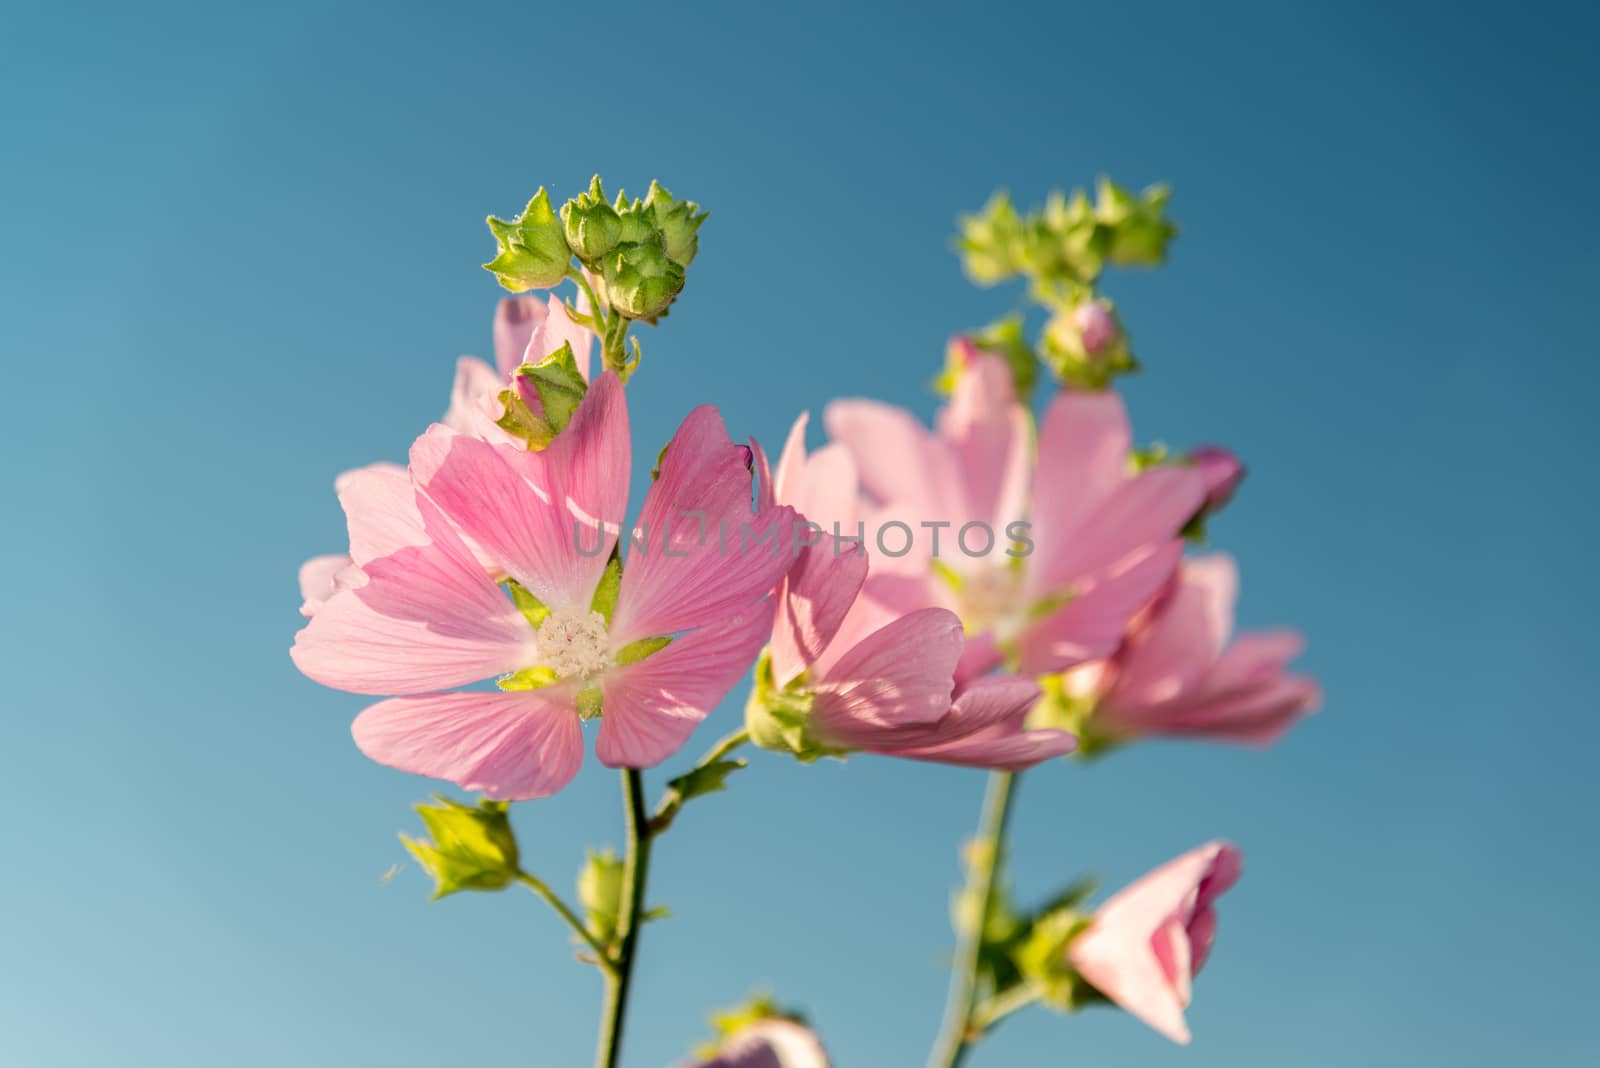 Meadow pink Mallow against a blue sky by olgavolodina